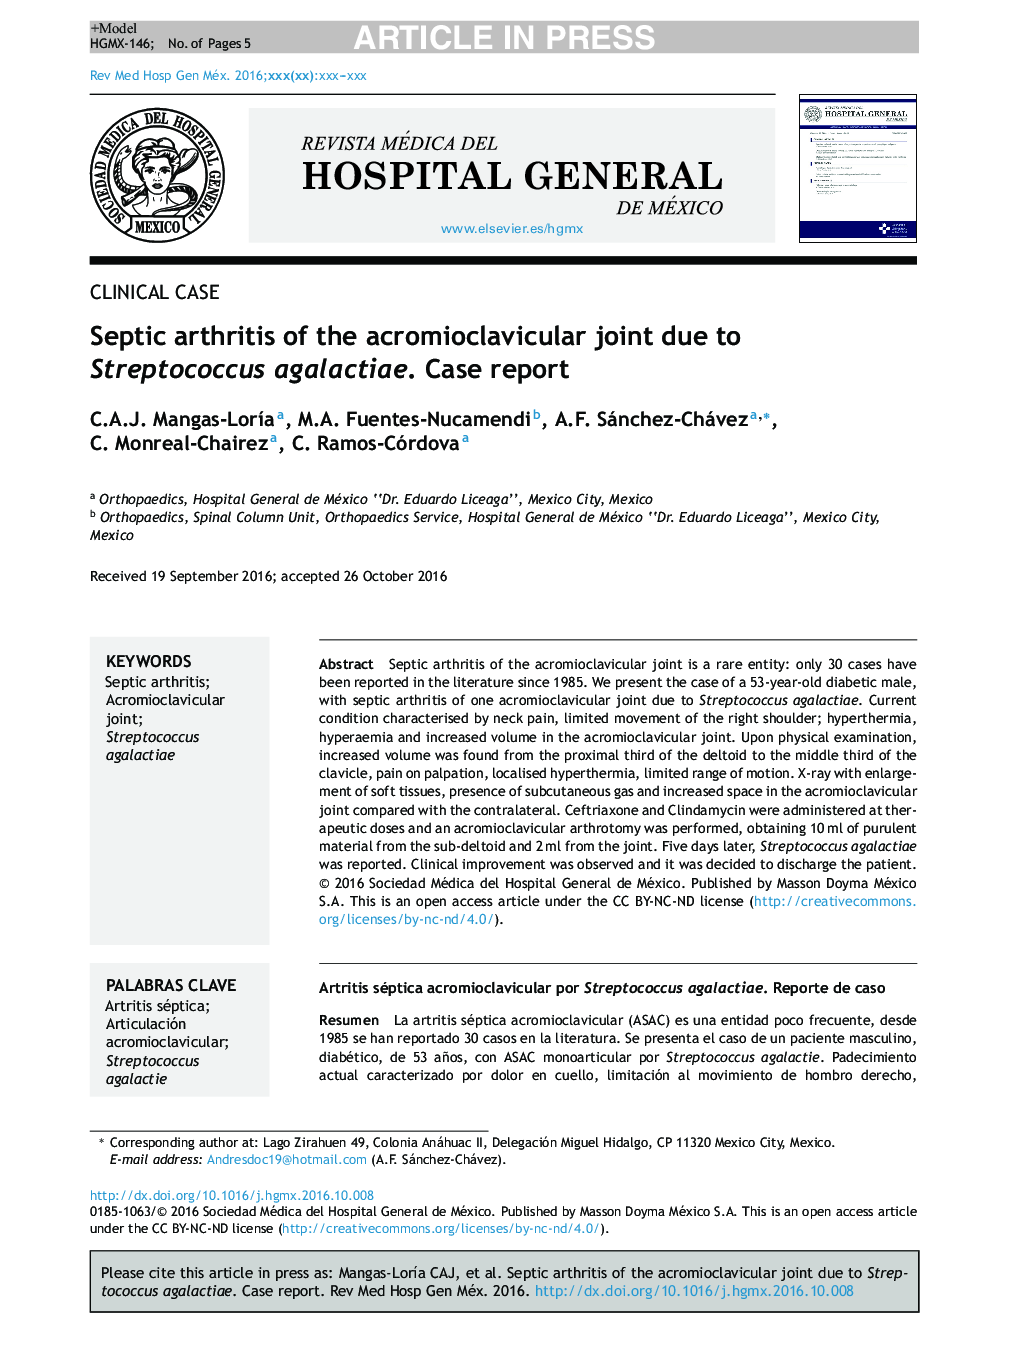 Septic arthritis of the acromioclavicular joint due to Streptococcus agalactiae. Case report